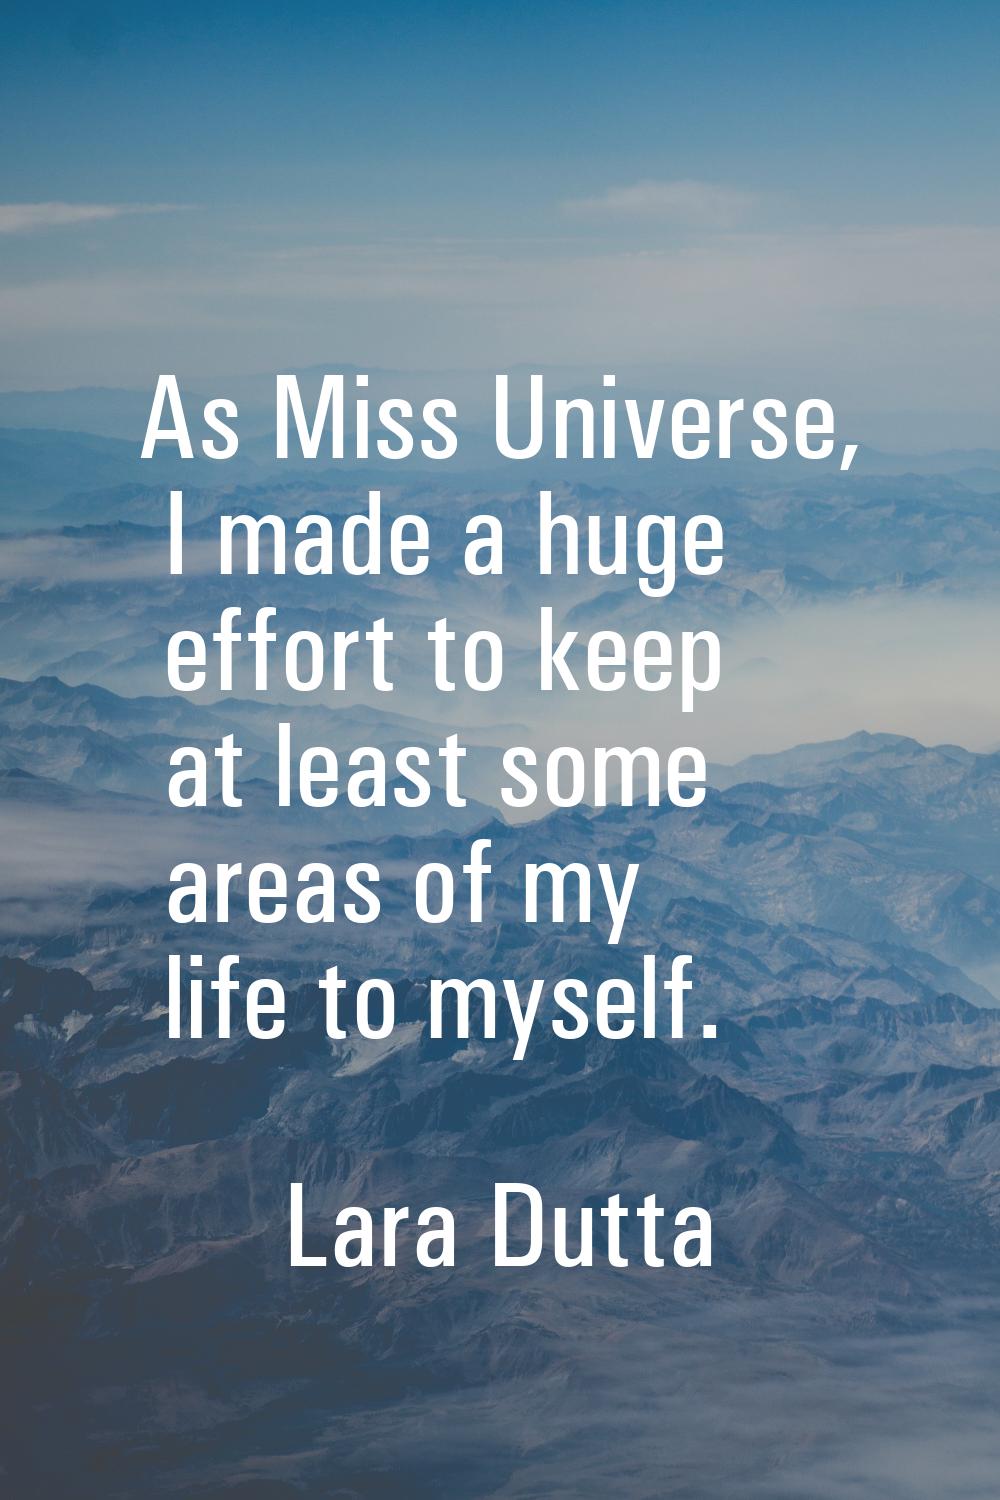 As Miss Universe, I made a huge effort to keep at least some areas of my life to myself.